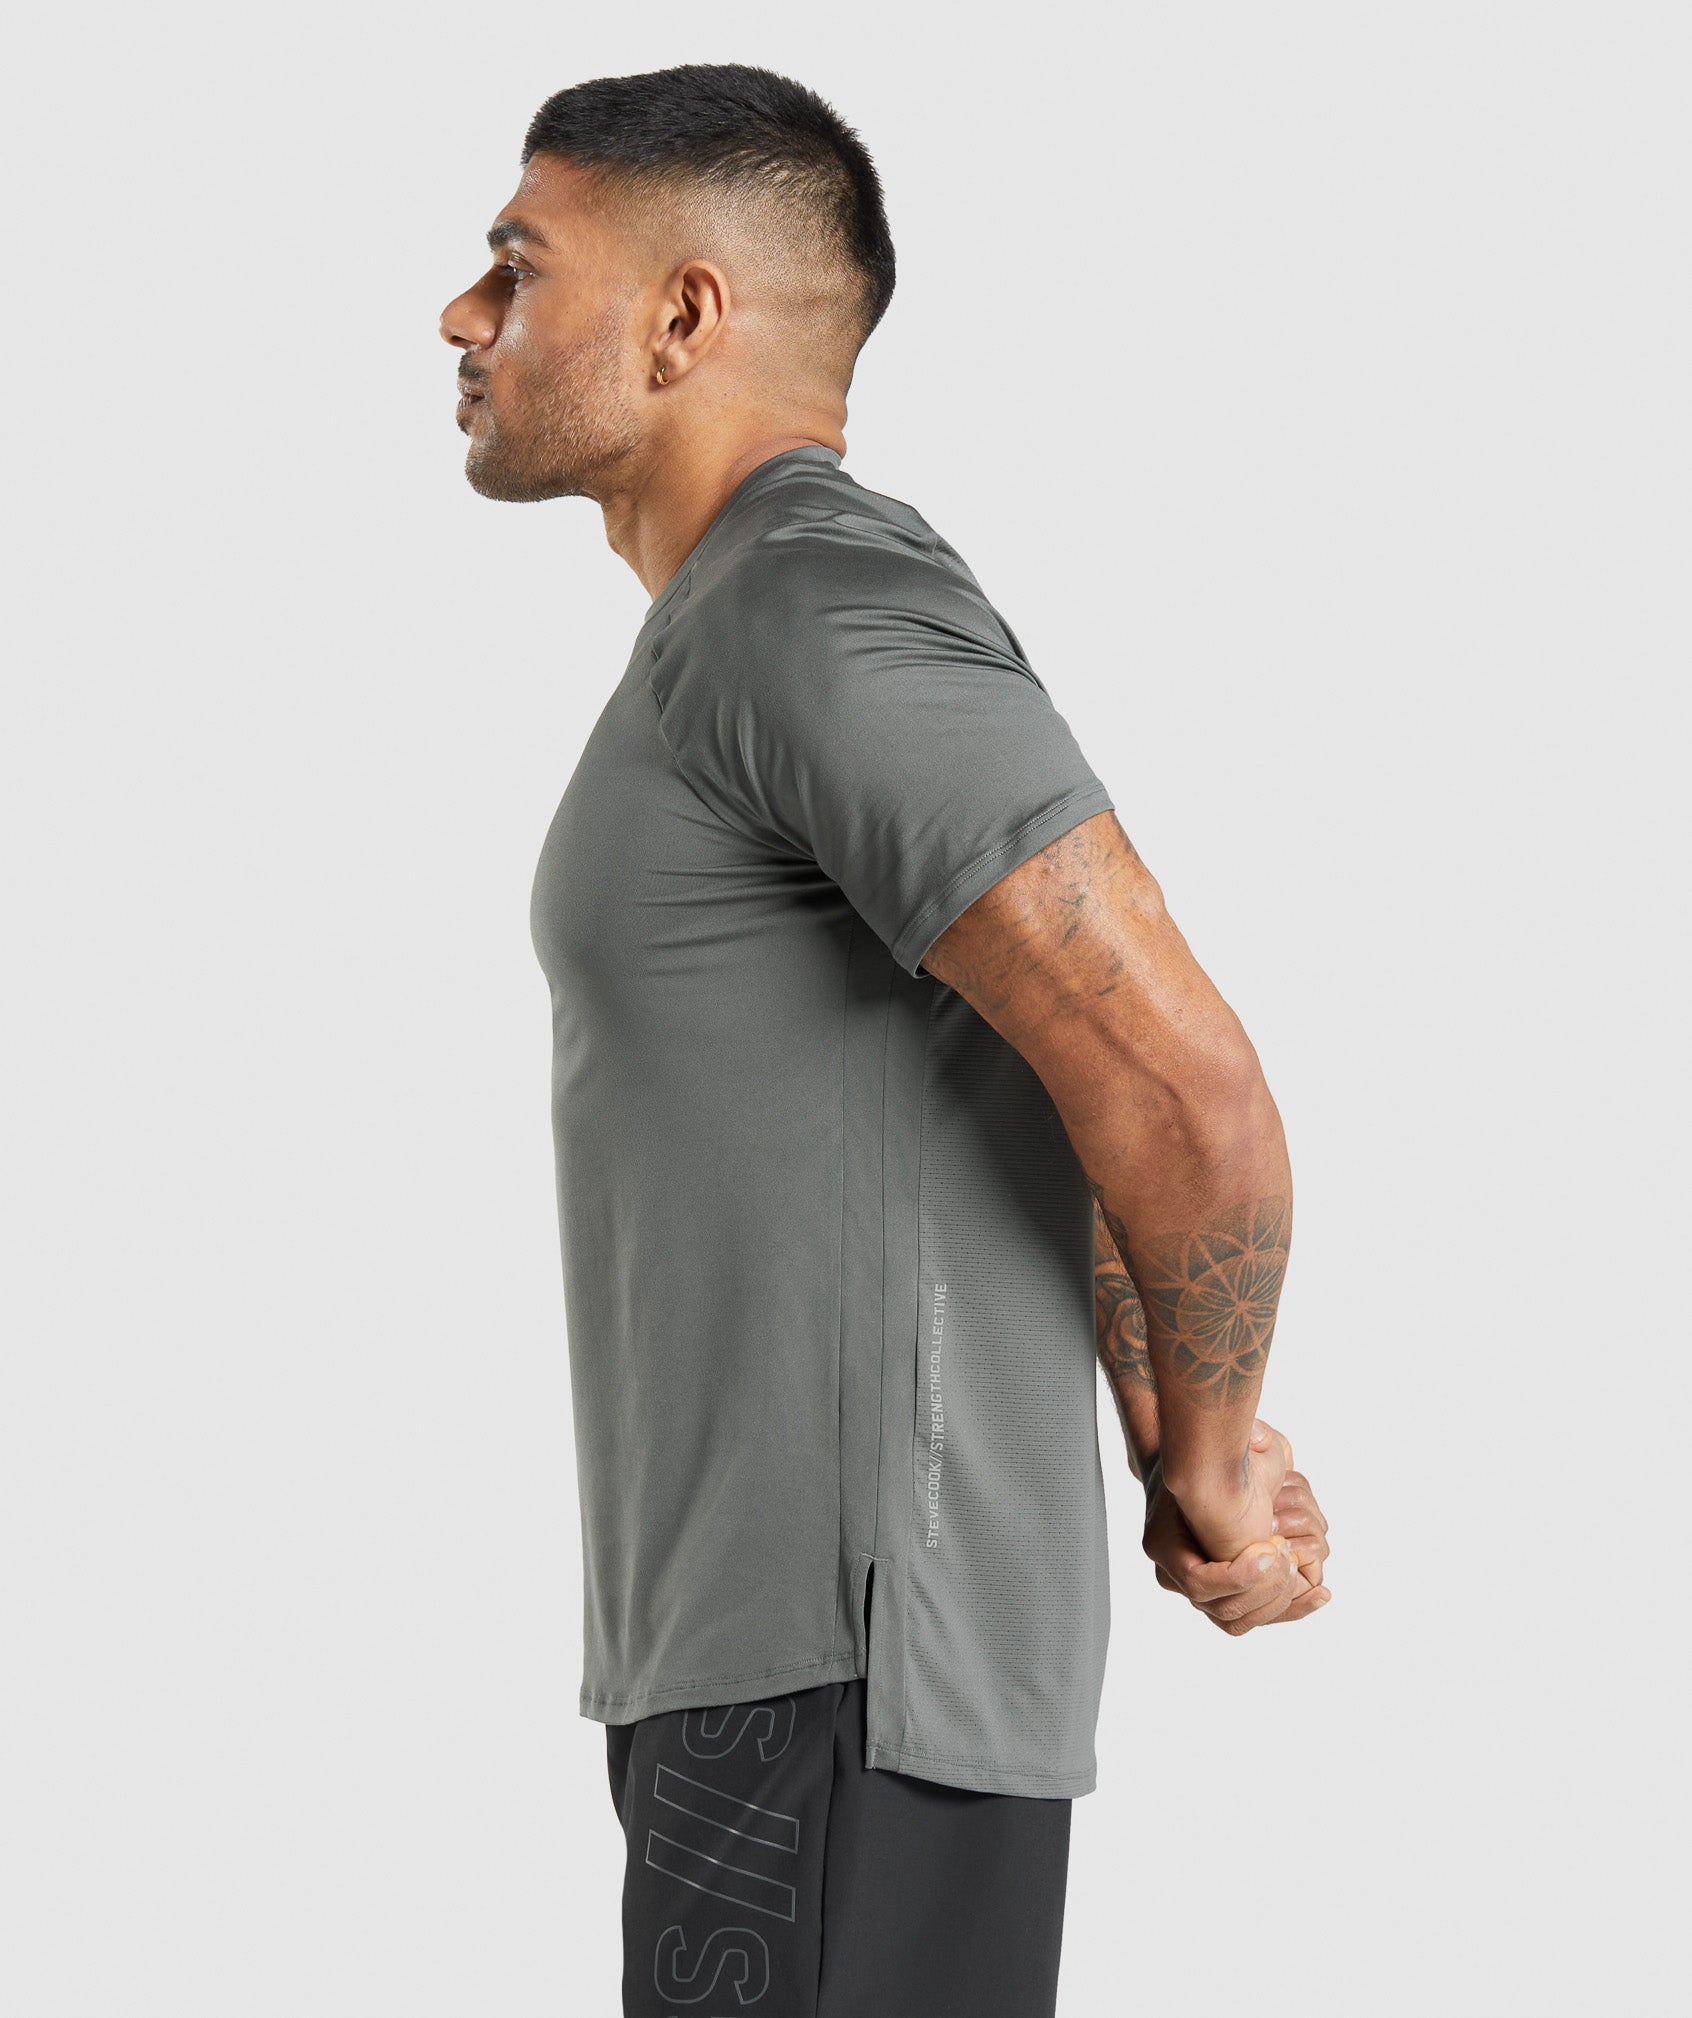 Gymshark//Steve Cook T-Shirt in Charcoal Grey - view 3